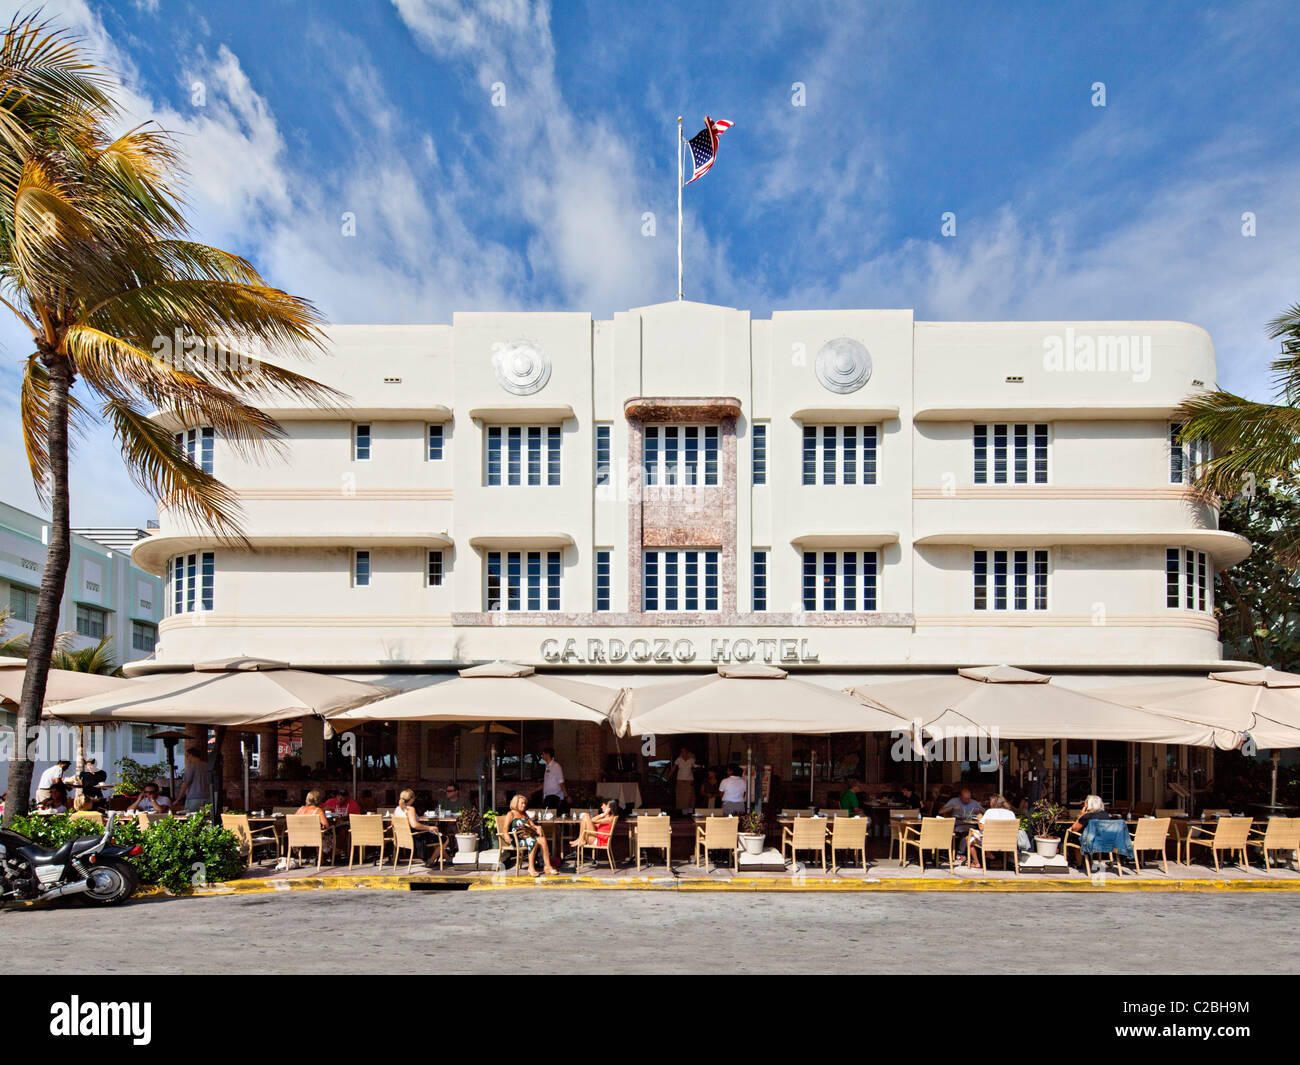 Cardozo Hotel South Beach, Miami, Banque D'Images